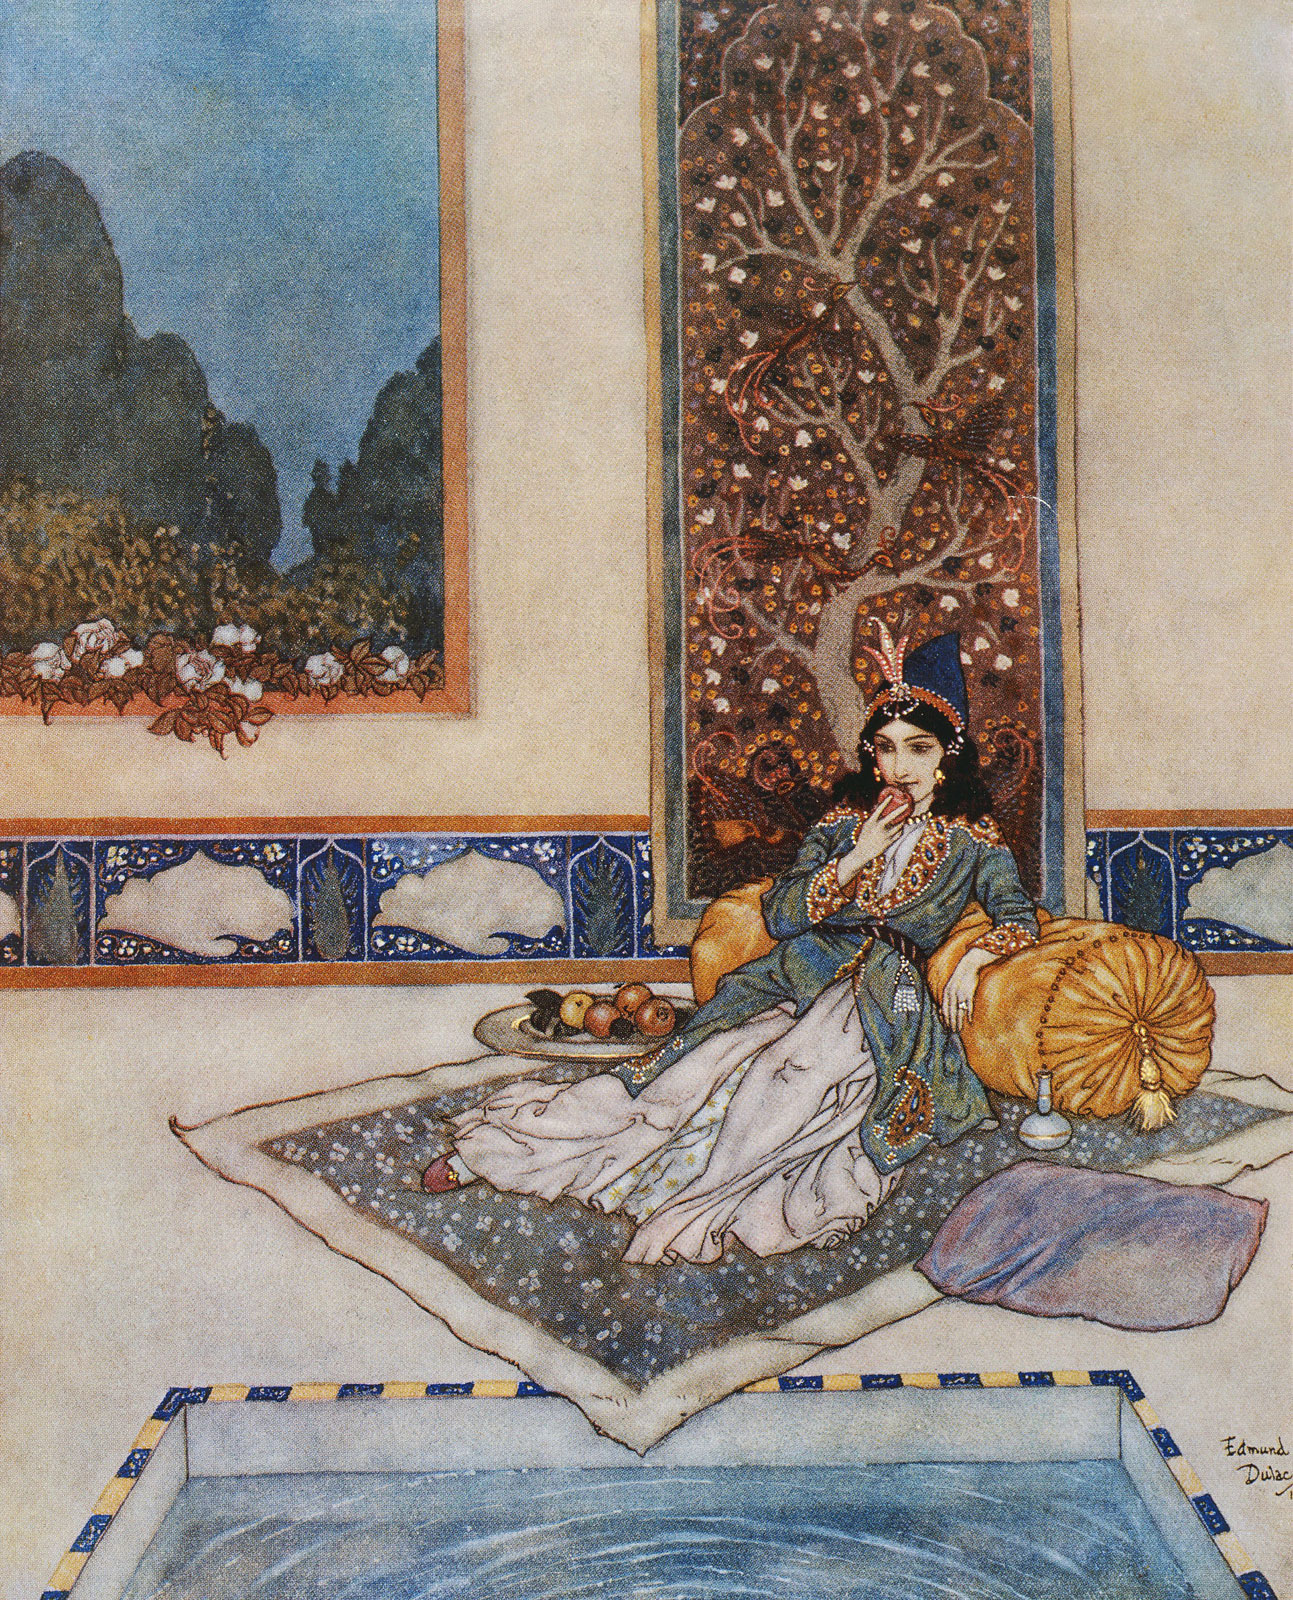 Scheherazade-from-A-Thousand-and-One-Nights-1911-illustration-by-Edmund-Dulac.jpg